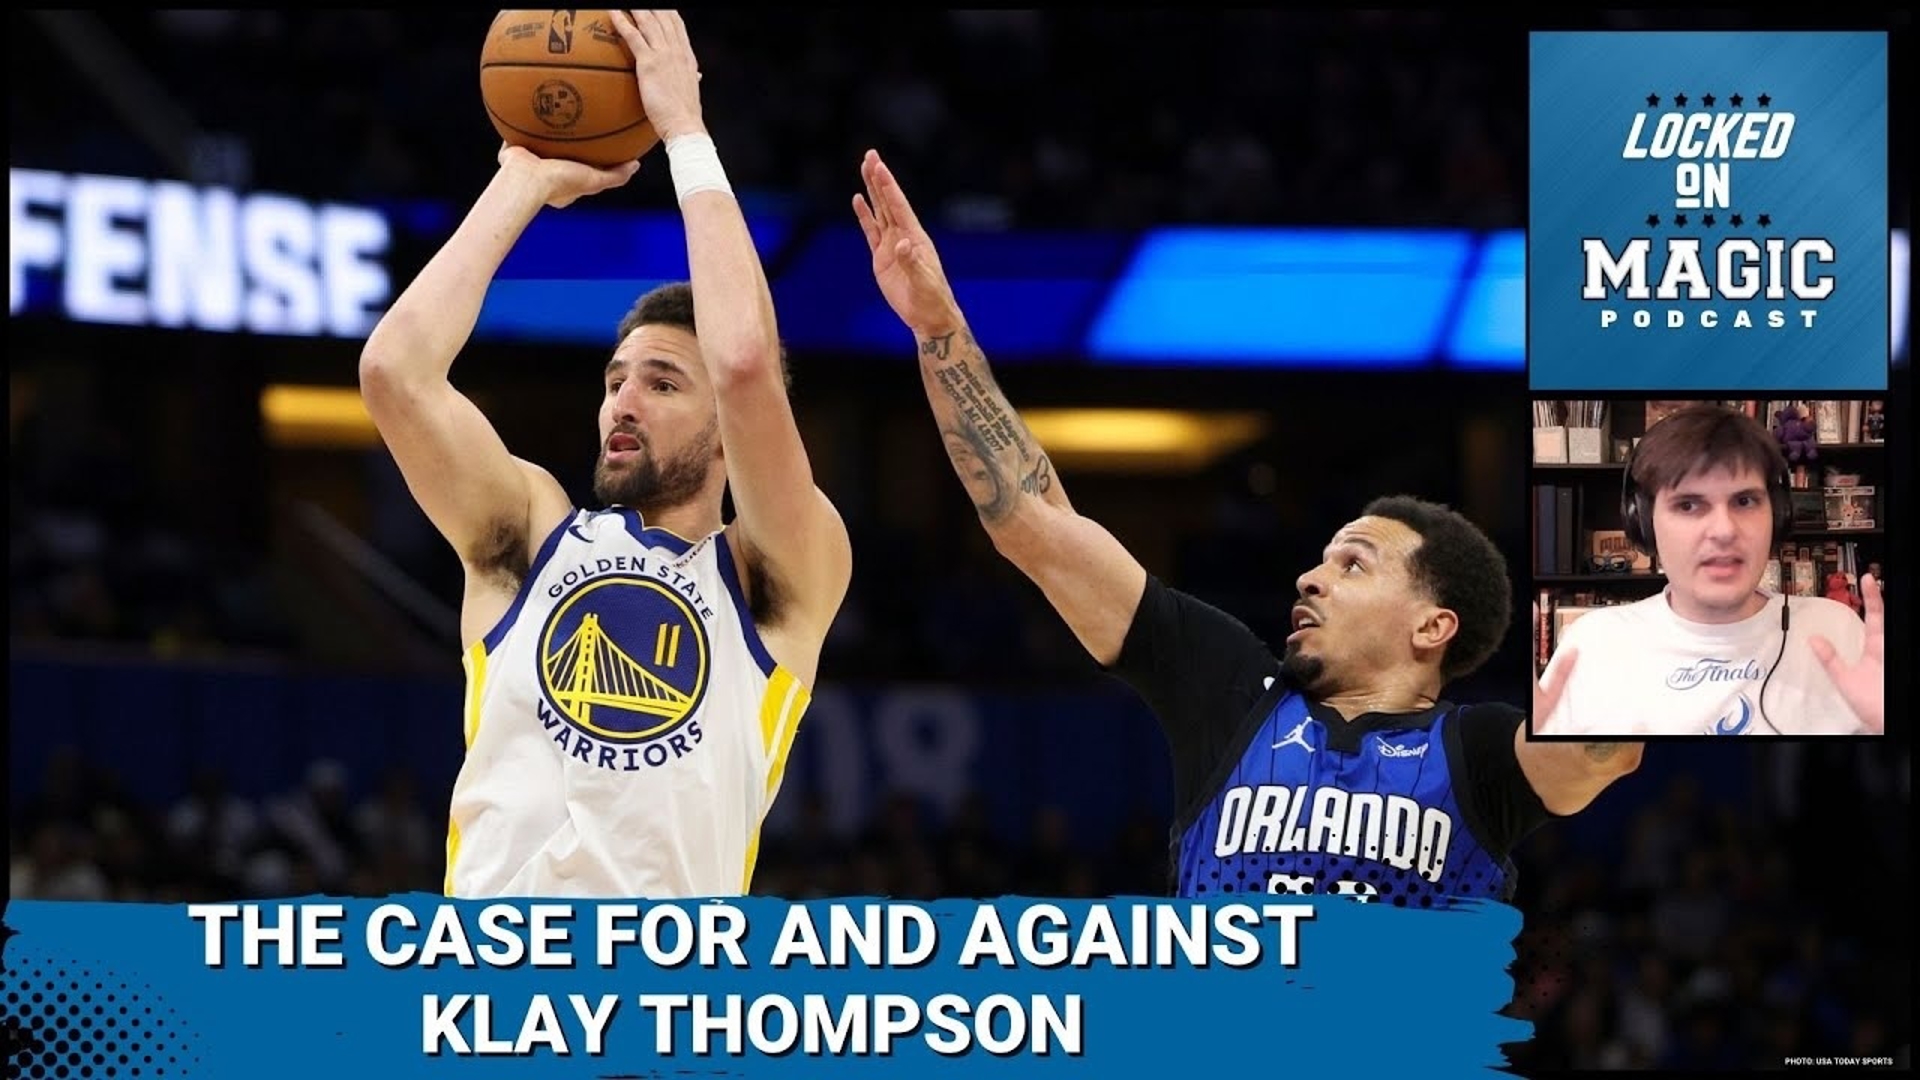 Undoubtedly, Klay Thompson's shooting and gravity would be a major addition for the Orlando Magic and dramatically change what their offense can do.